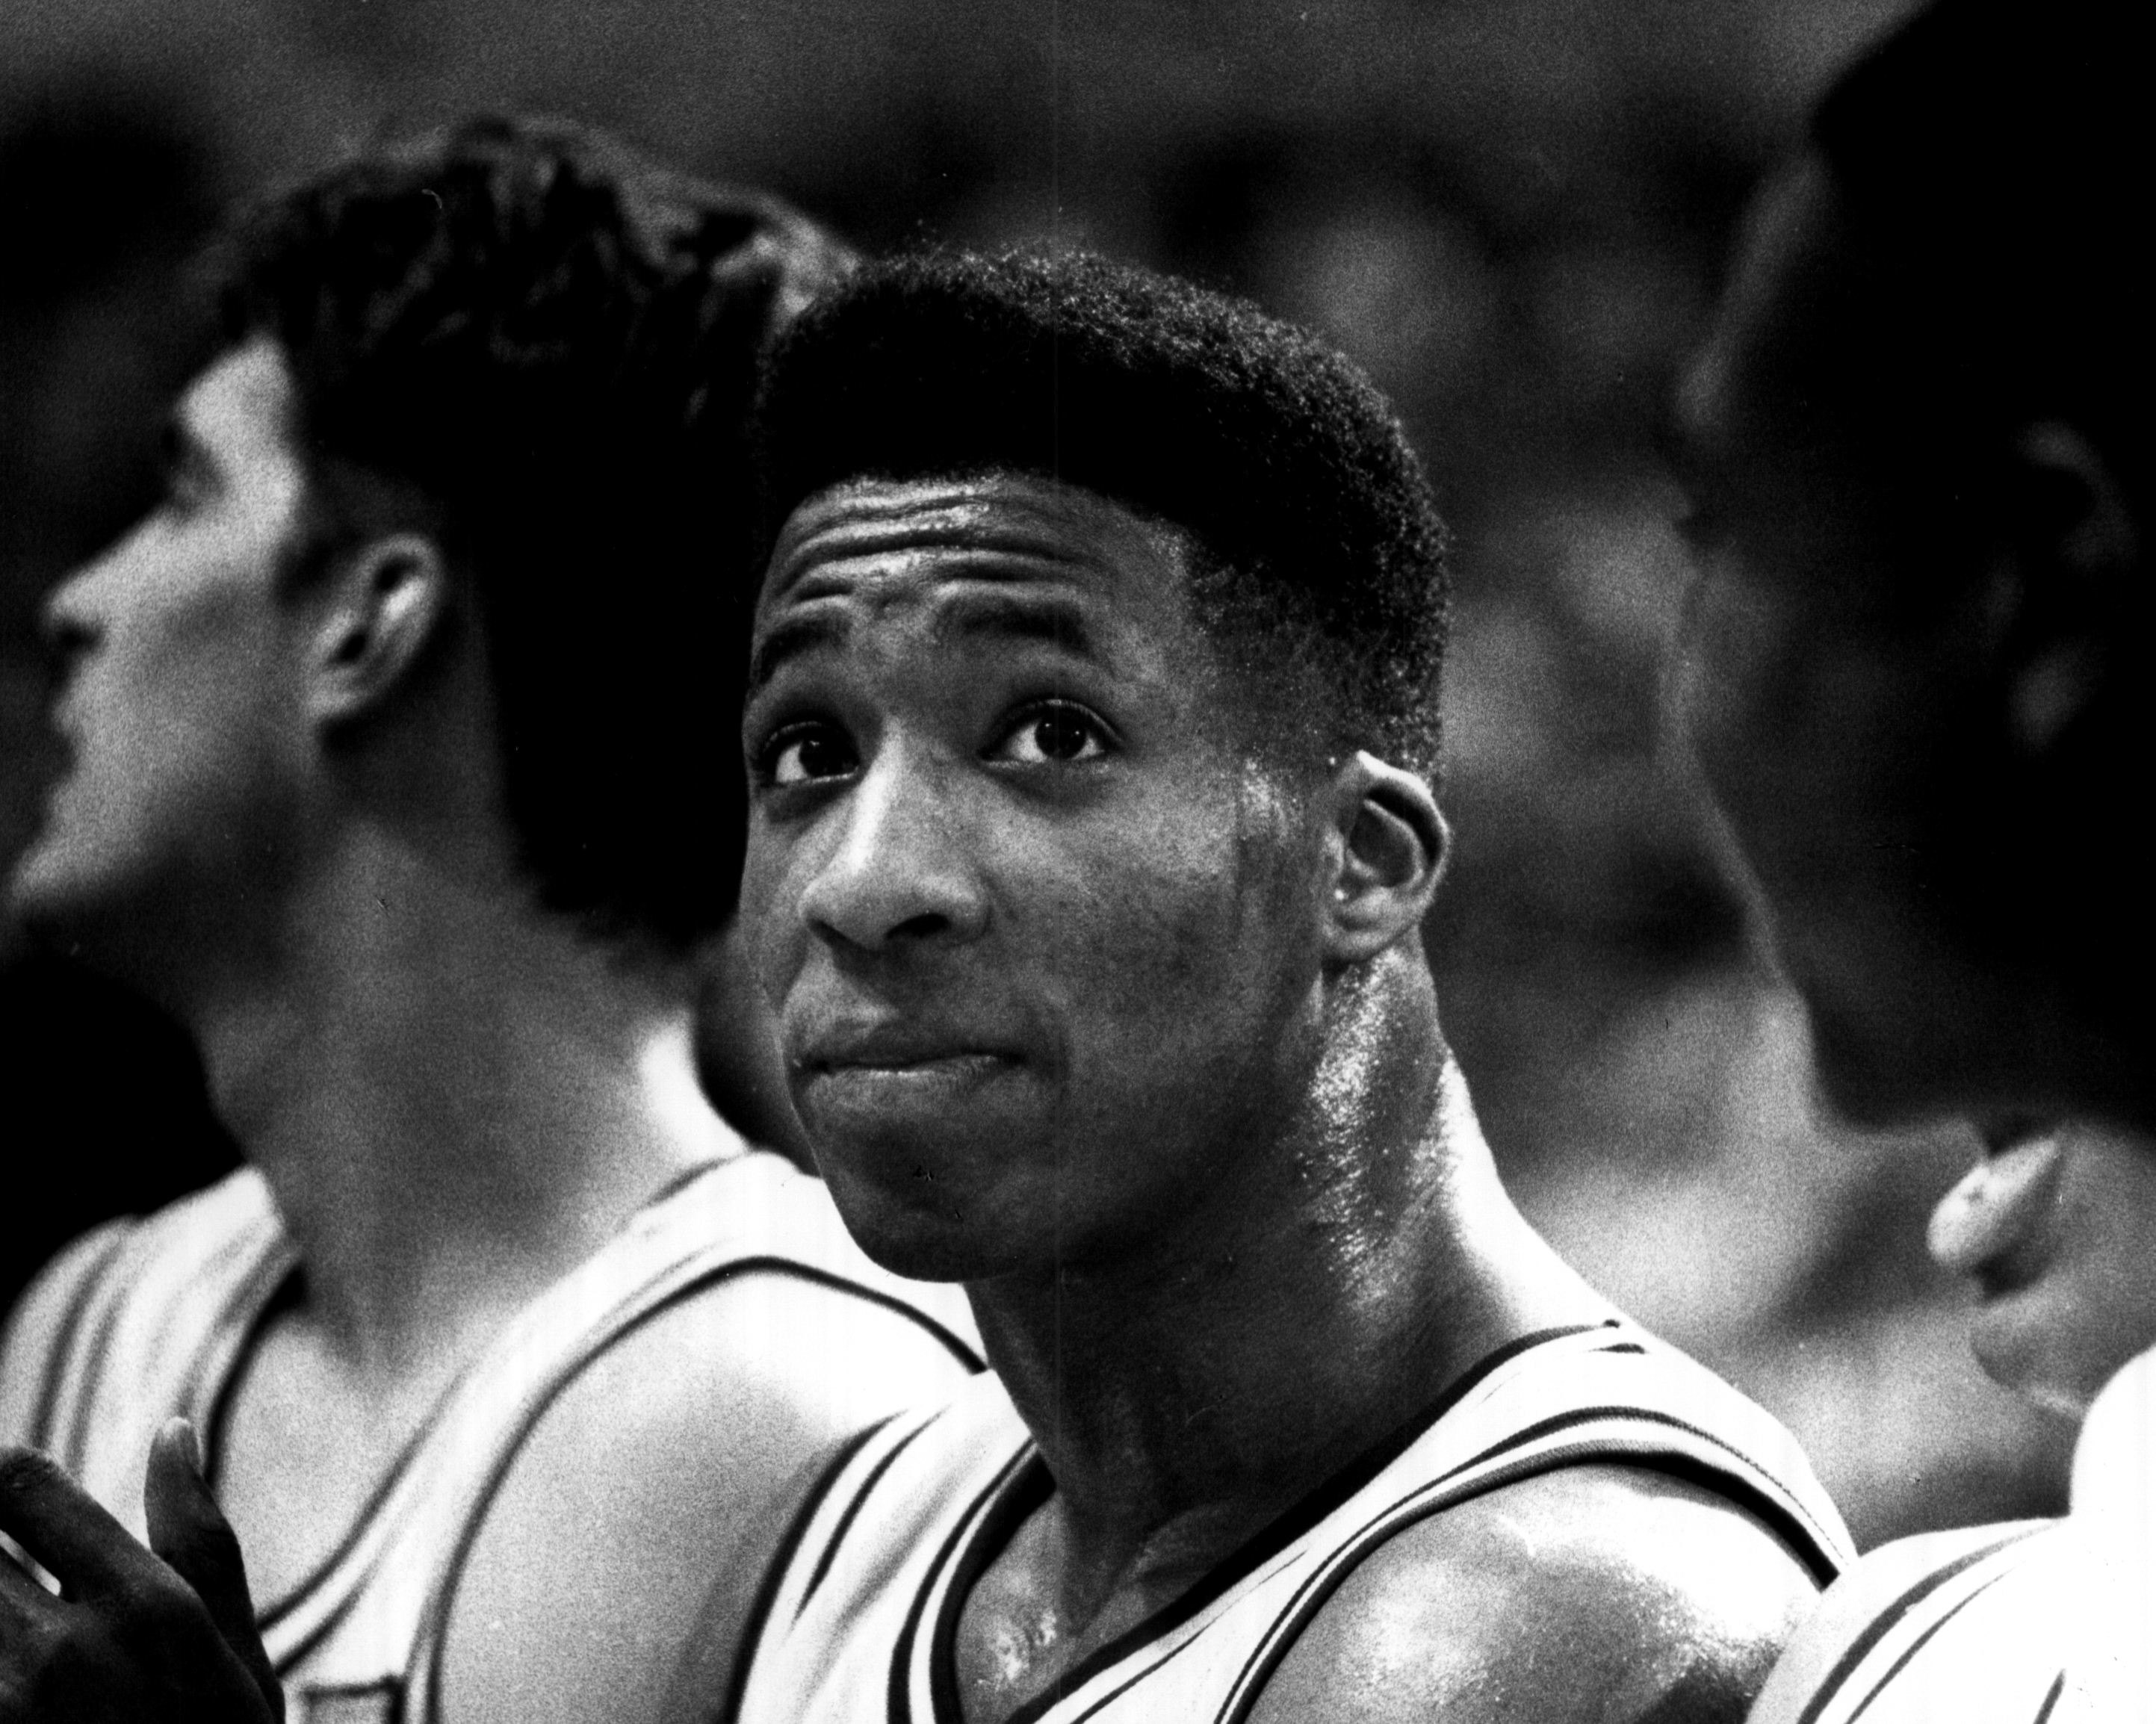 Duke wing player Brian Davis seen on the team's bench in 1991.